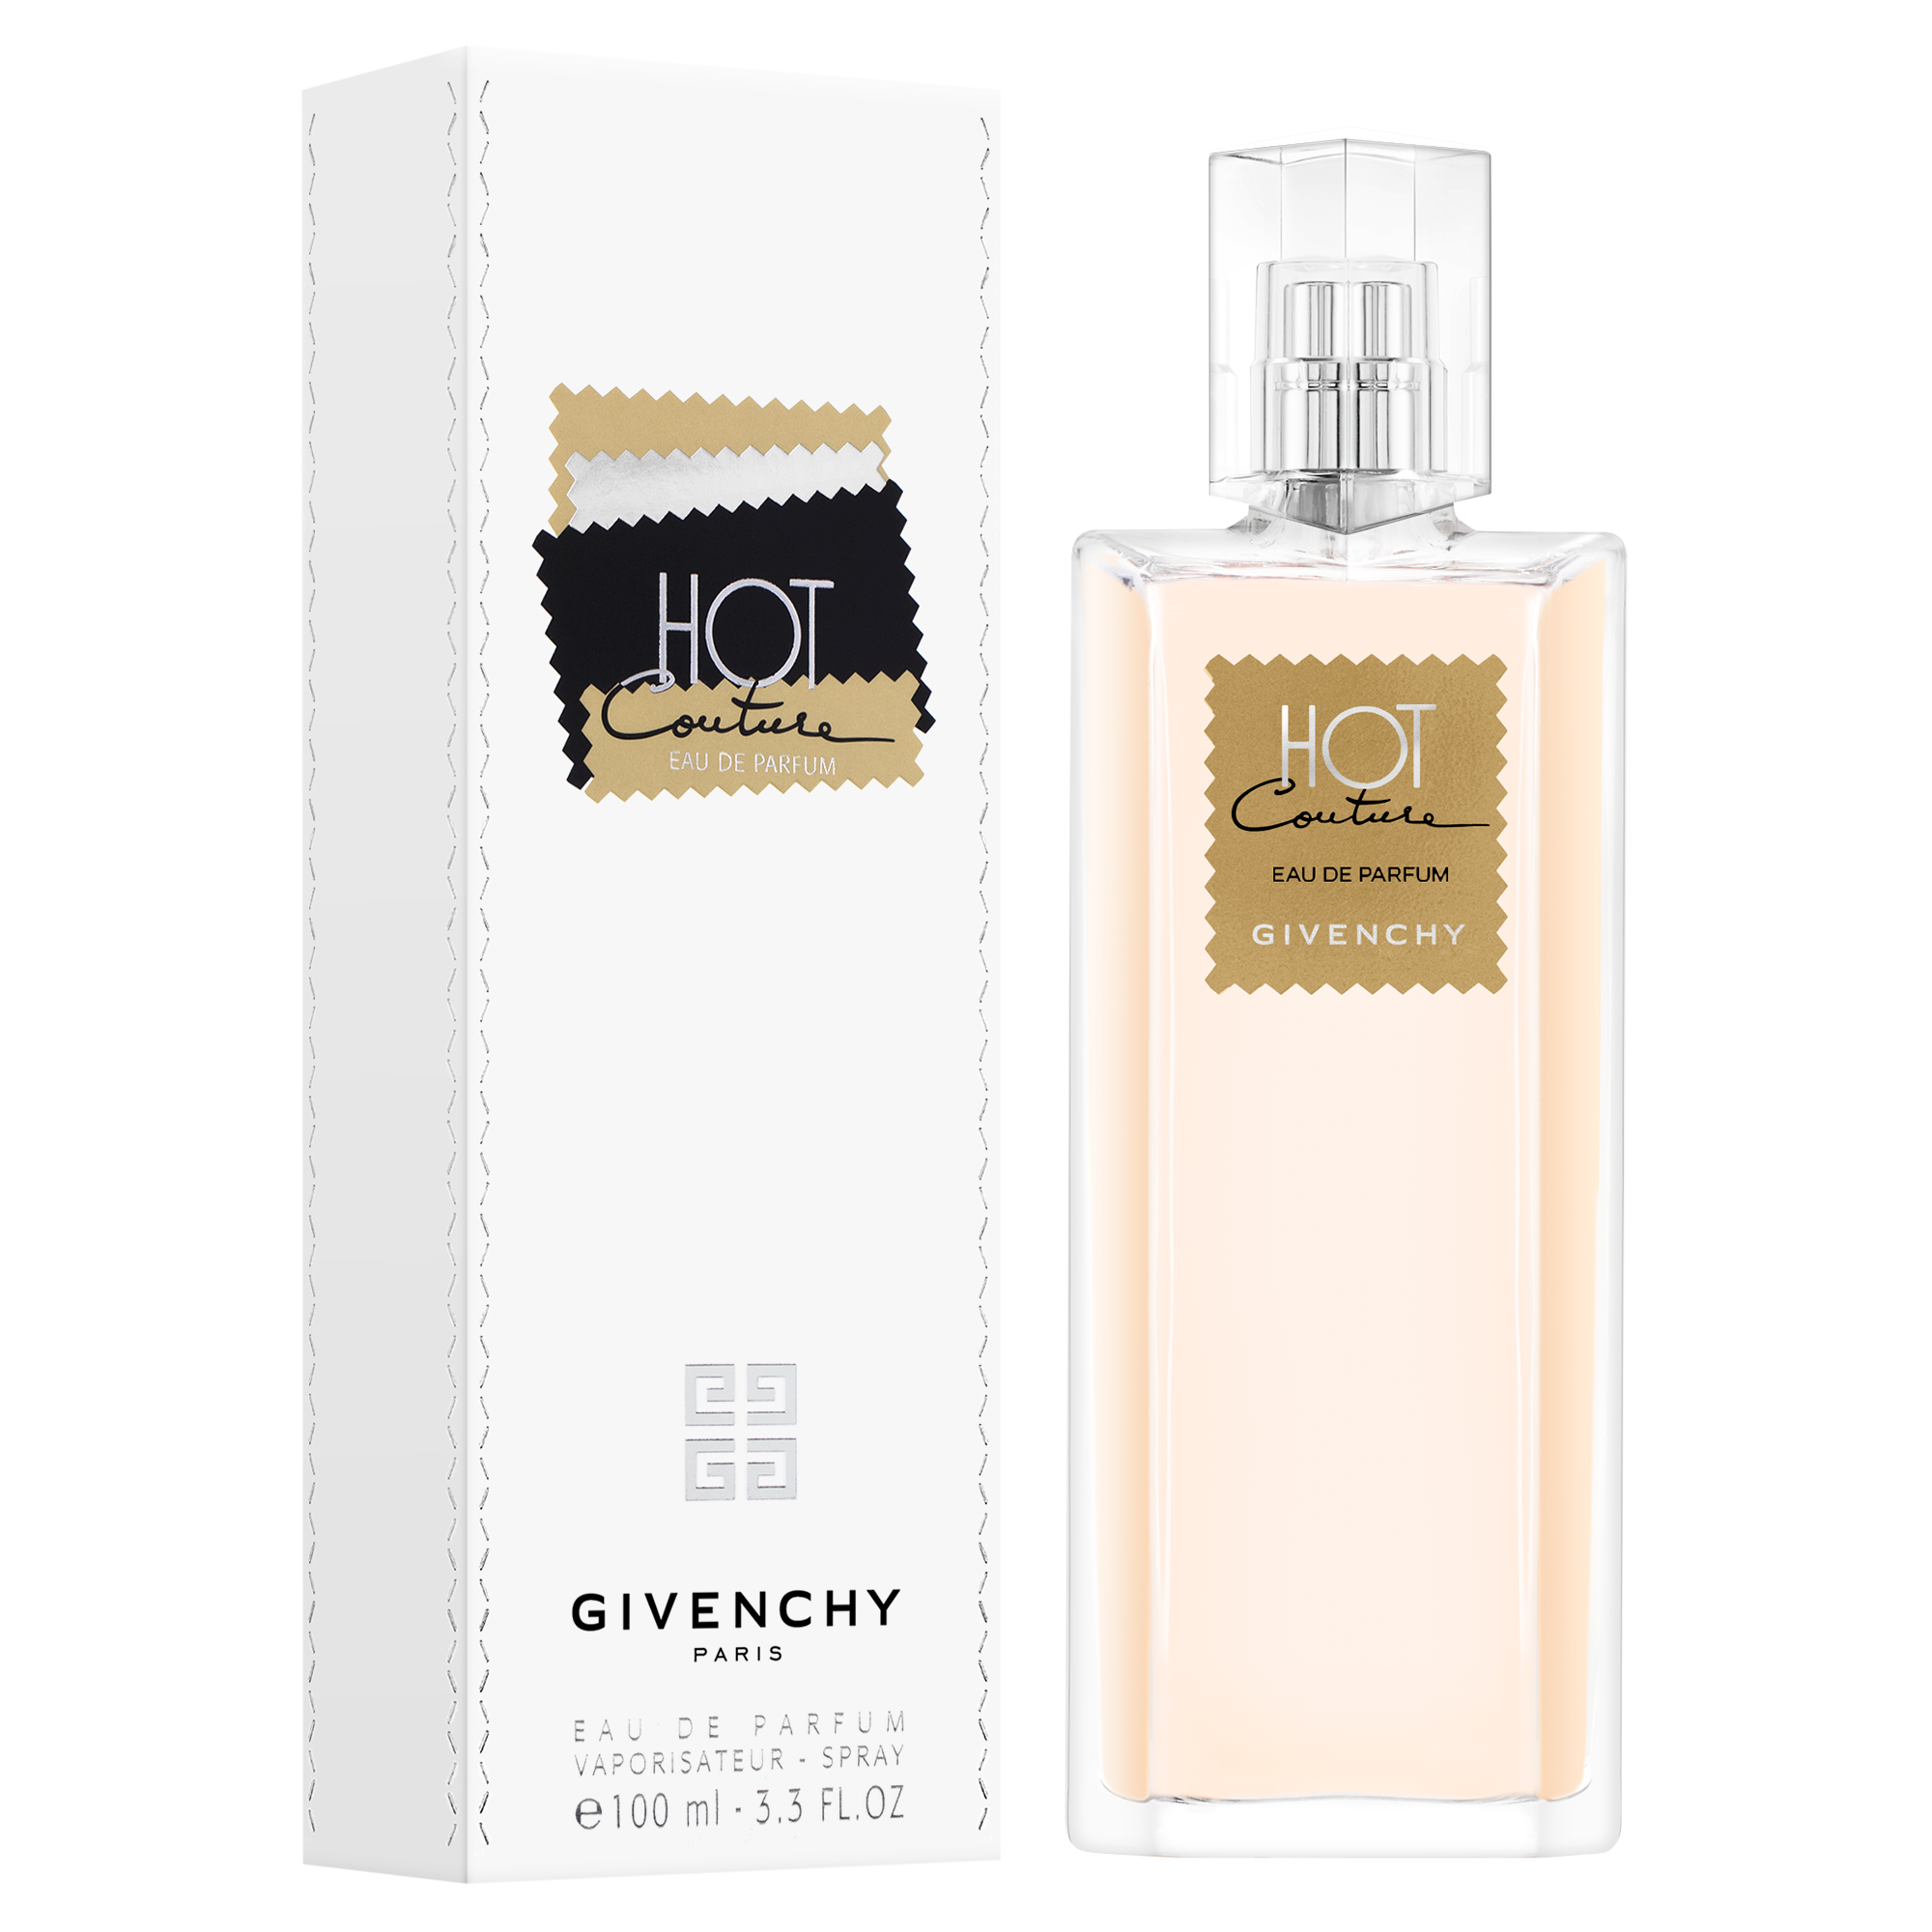 HOT COUTURE ∷ GIVENCHY